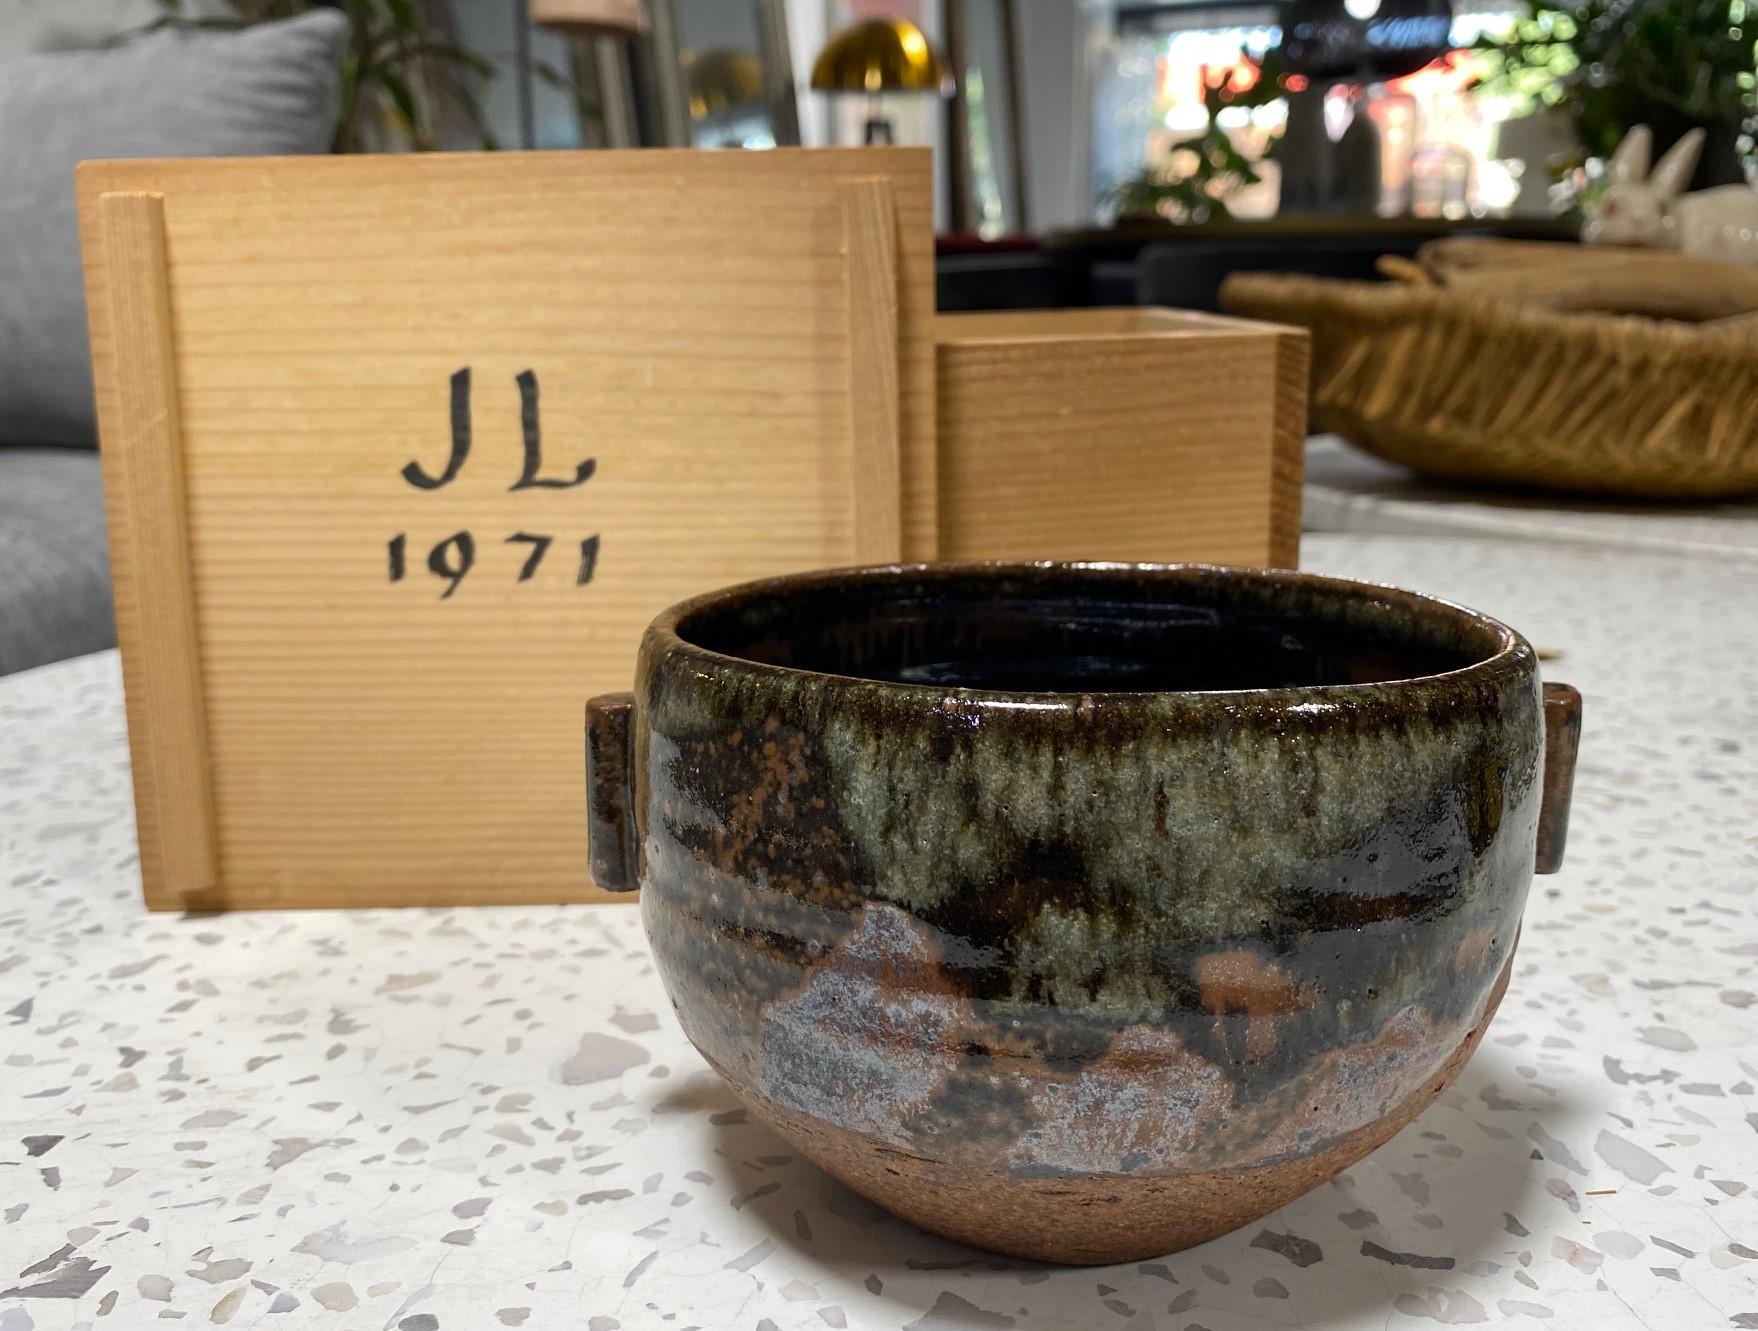 Janet Leach Signed British Studio Pottery Japanese Chawan Tea Bowl with Box 1971 For Sale 9